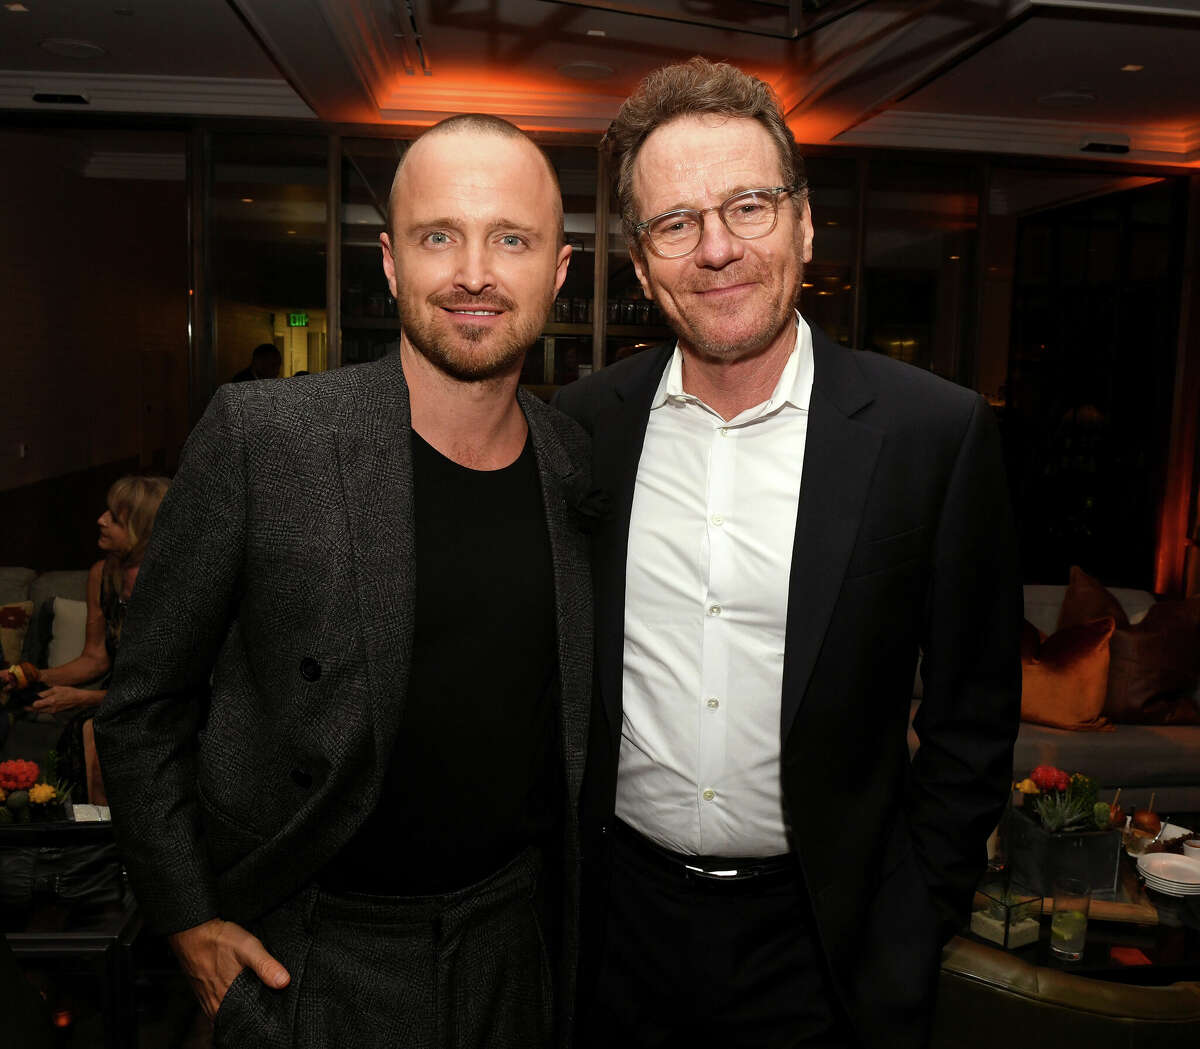 Aaron Paul and Bryan Cranston pose at the after party for the premiere of Netfflix's "El Camino: A Breaking Bad Movie" at Baltaire on October 07, 2019 in Los Angeles, California. 